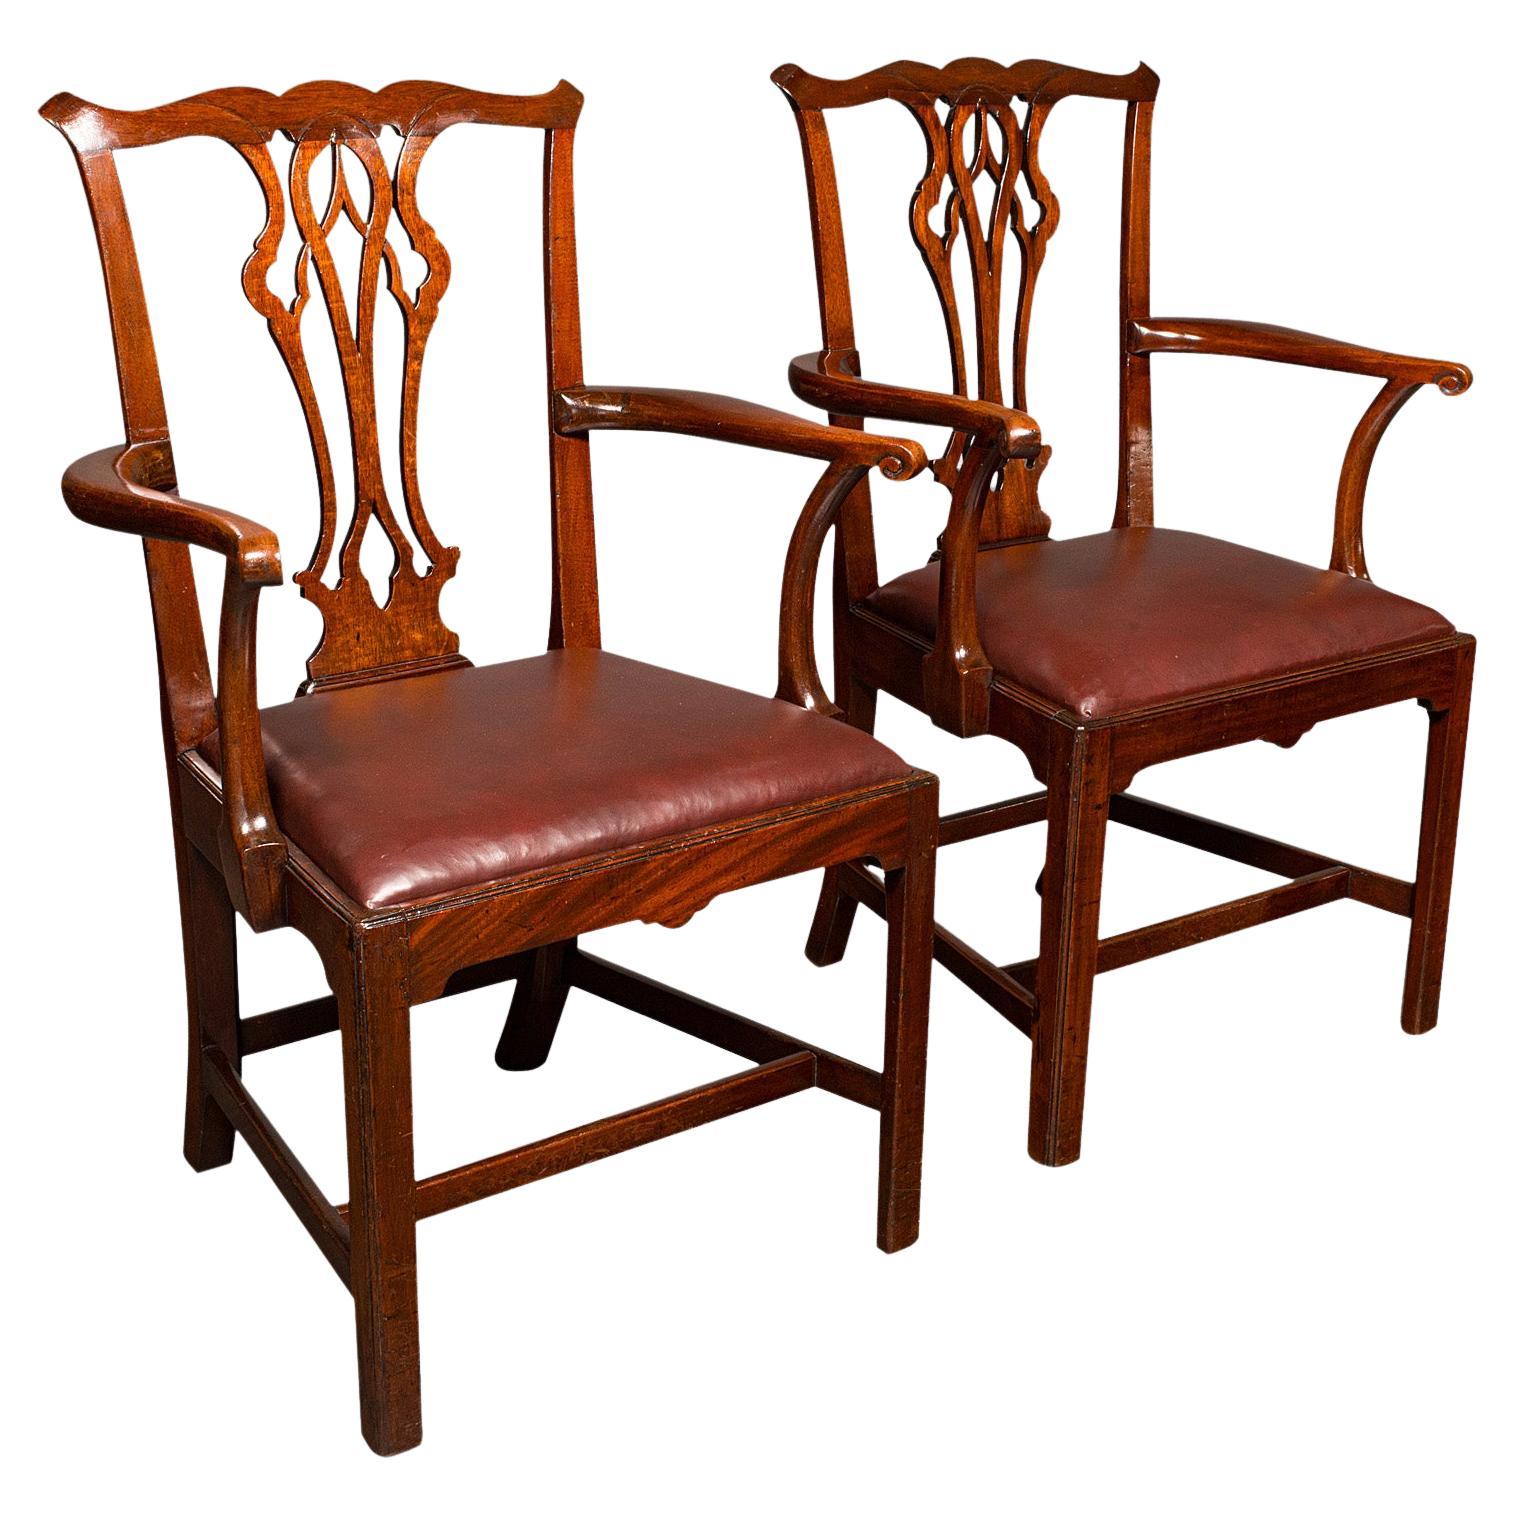 Pair Of Antique Carver Chairs, English, Elbow Seat, Chippendale Taste, Georgian For Sale